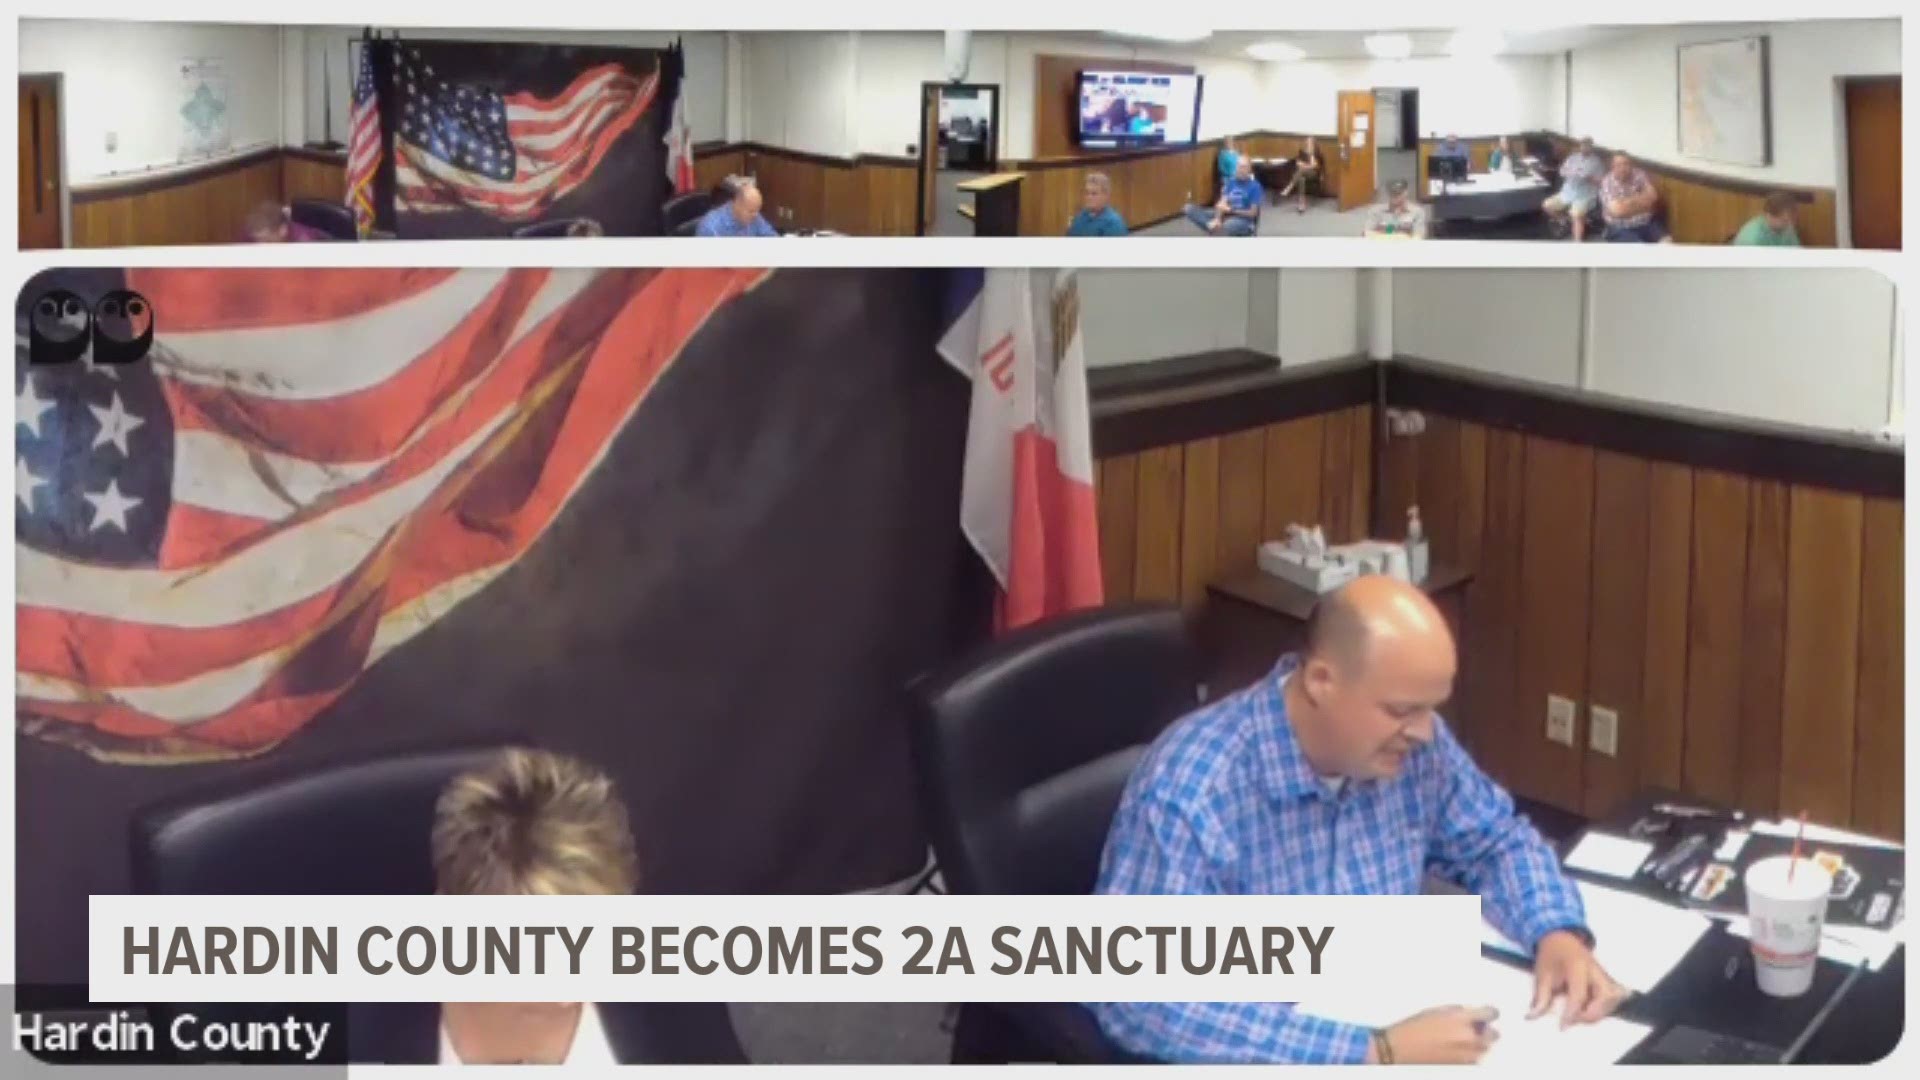 The Hardin County Board of Supervisors approved a resolution Wednesday morning making the county a Second Amendment Sanctuary.